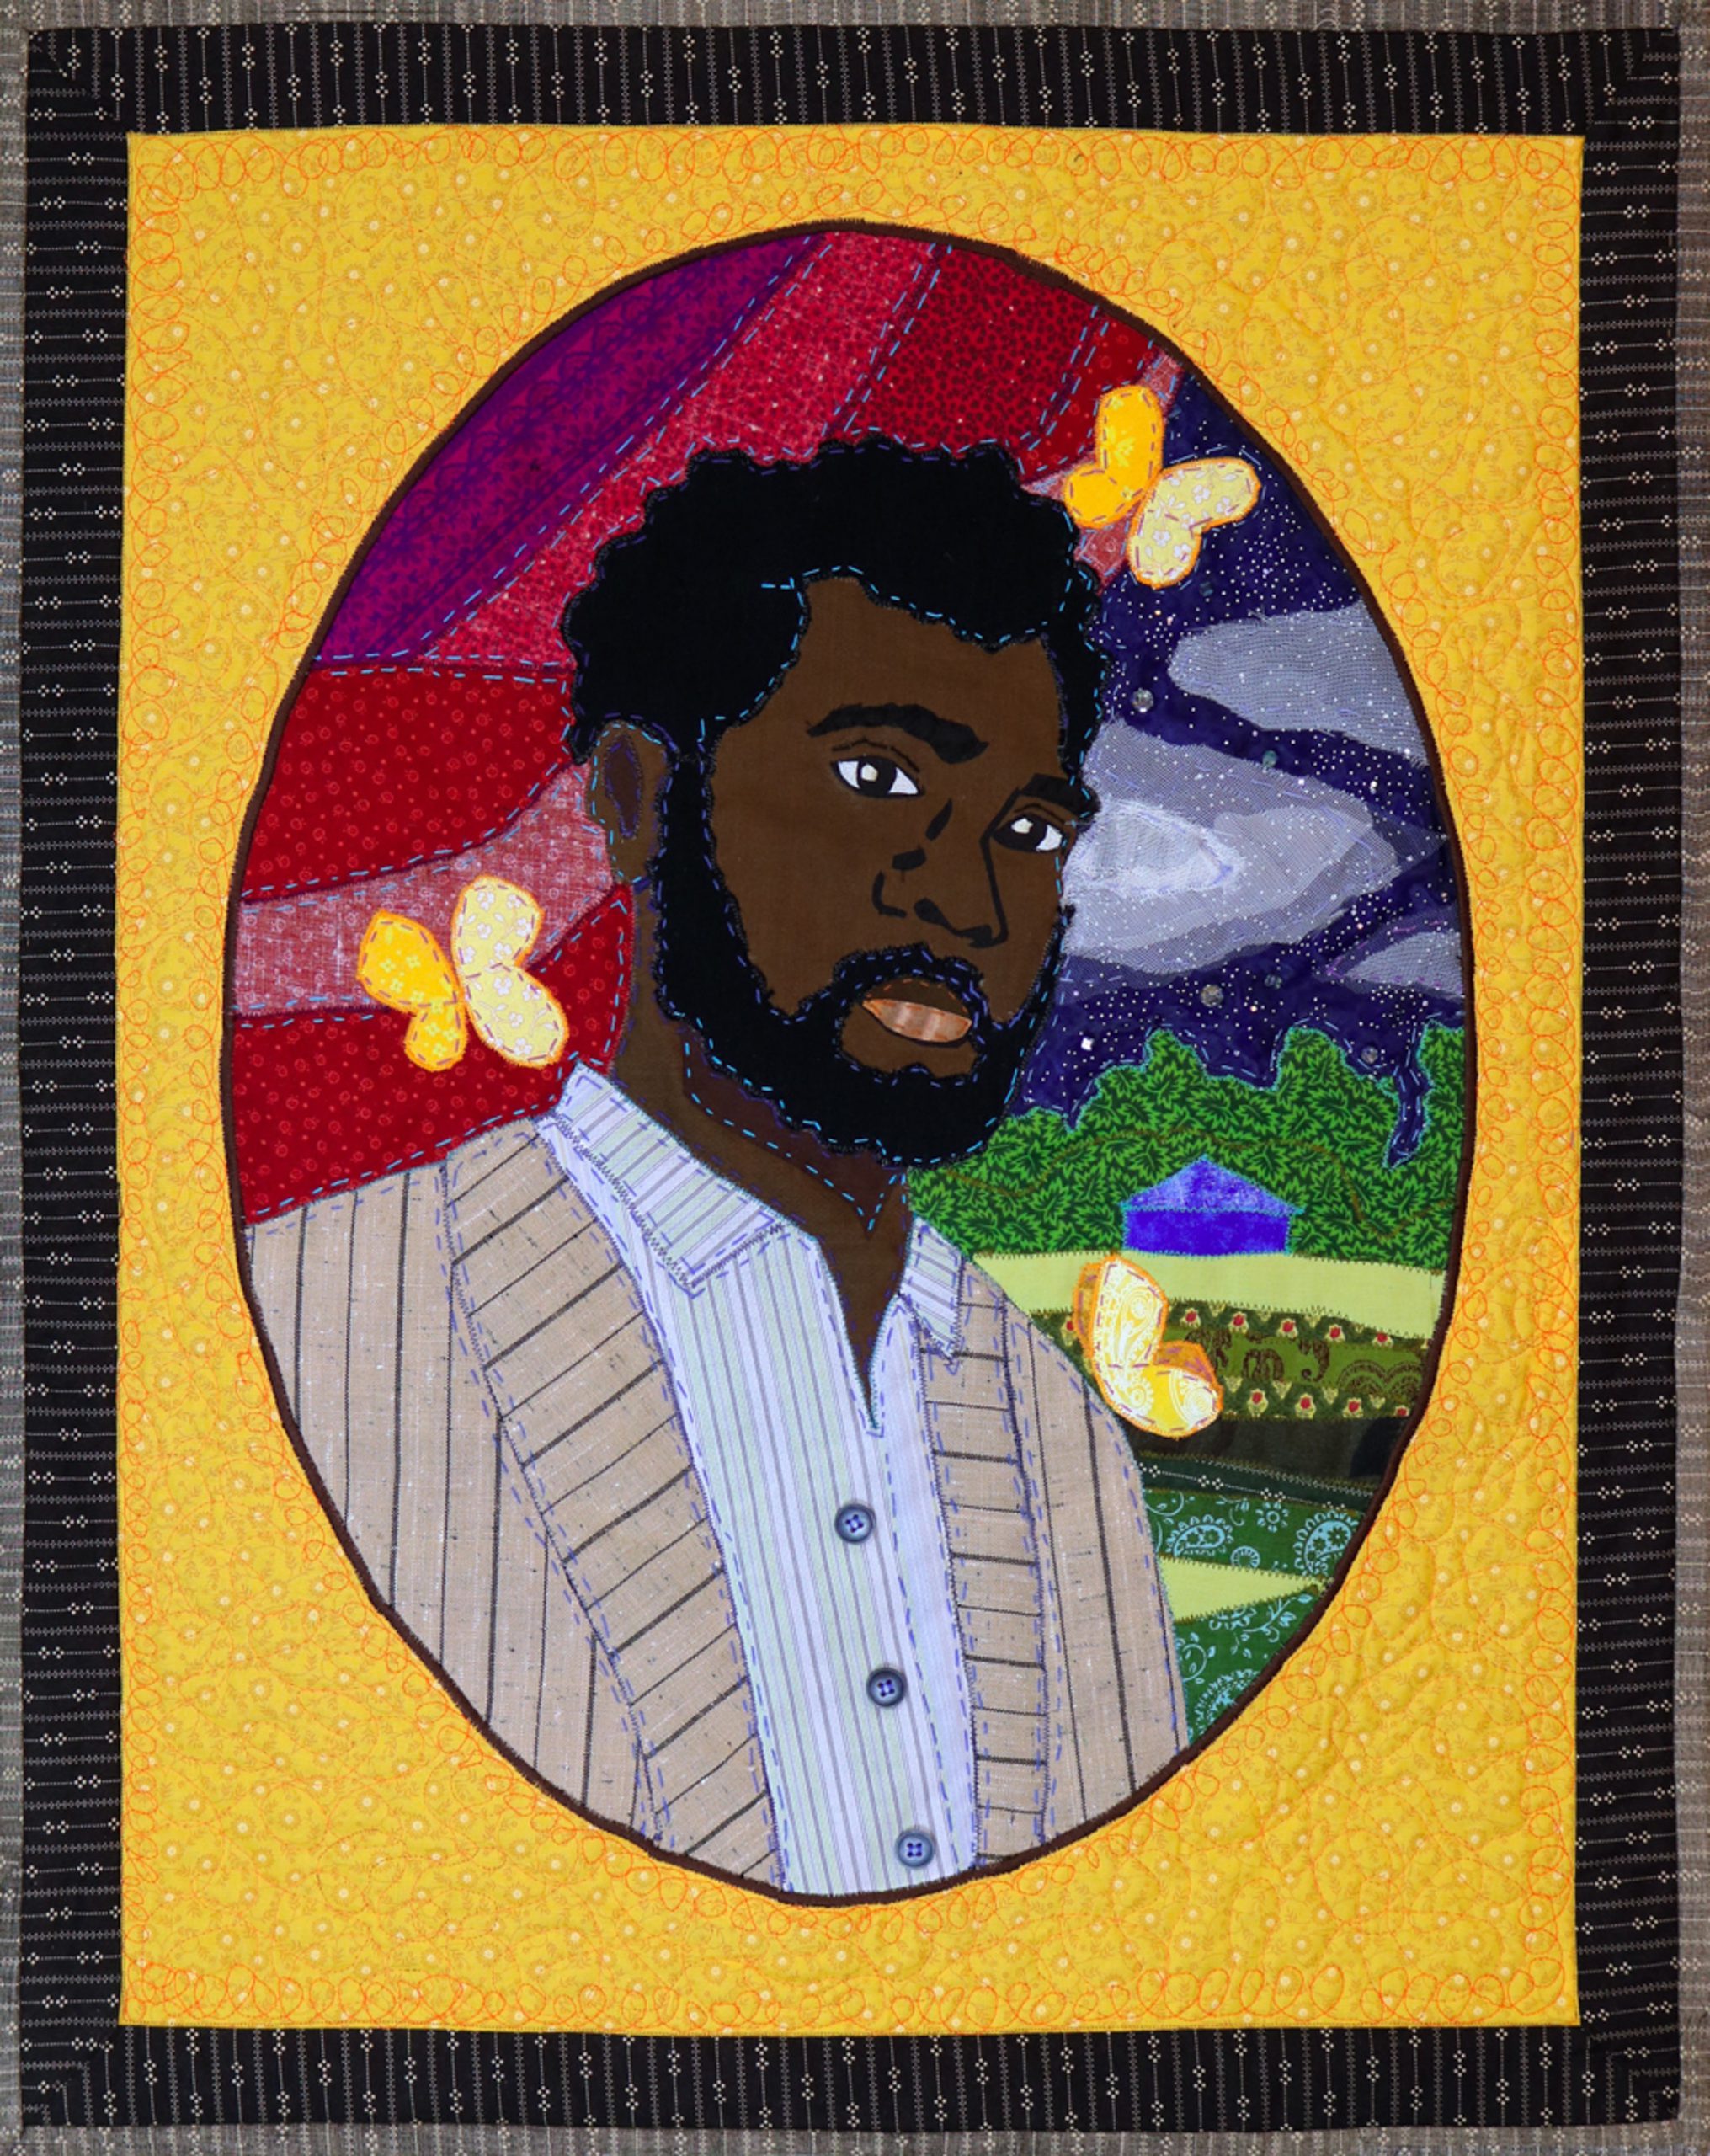 Stephen Towns, Let Not Man Put Asunder: Portrait of Nat Turner, 2018.   Natural and synthetic fabric, nylon tulle, polyester and cotton thread, metallic thread, crystal glass beads, resin buttons. 30 x 24 inches. Courtesy of the artist.